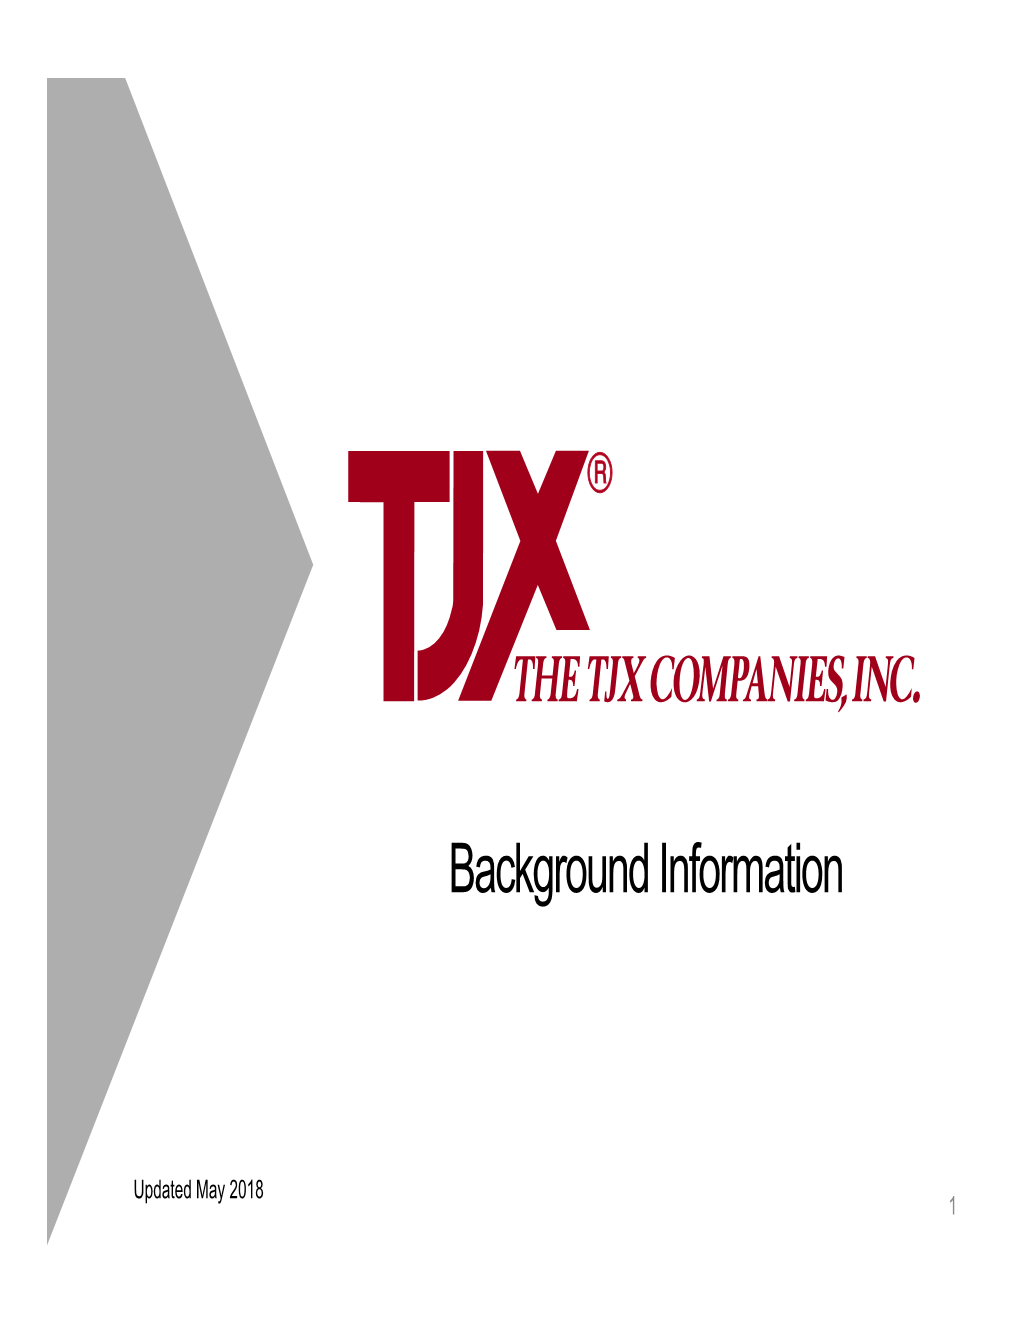 The TJX Companies, Inc. Background Information